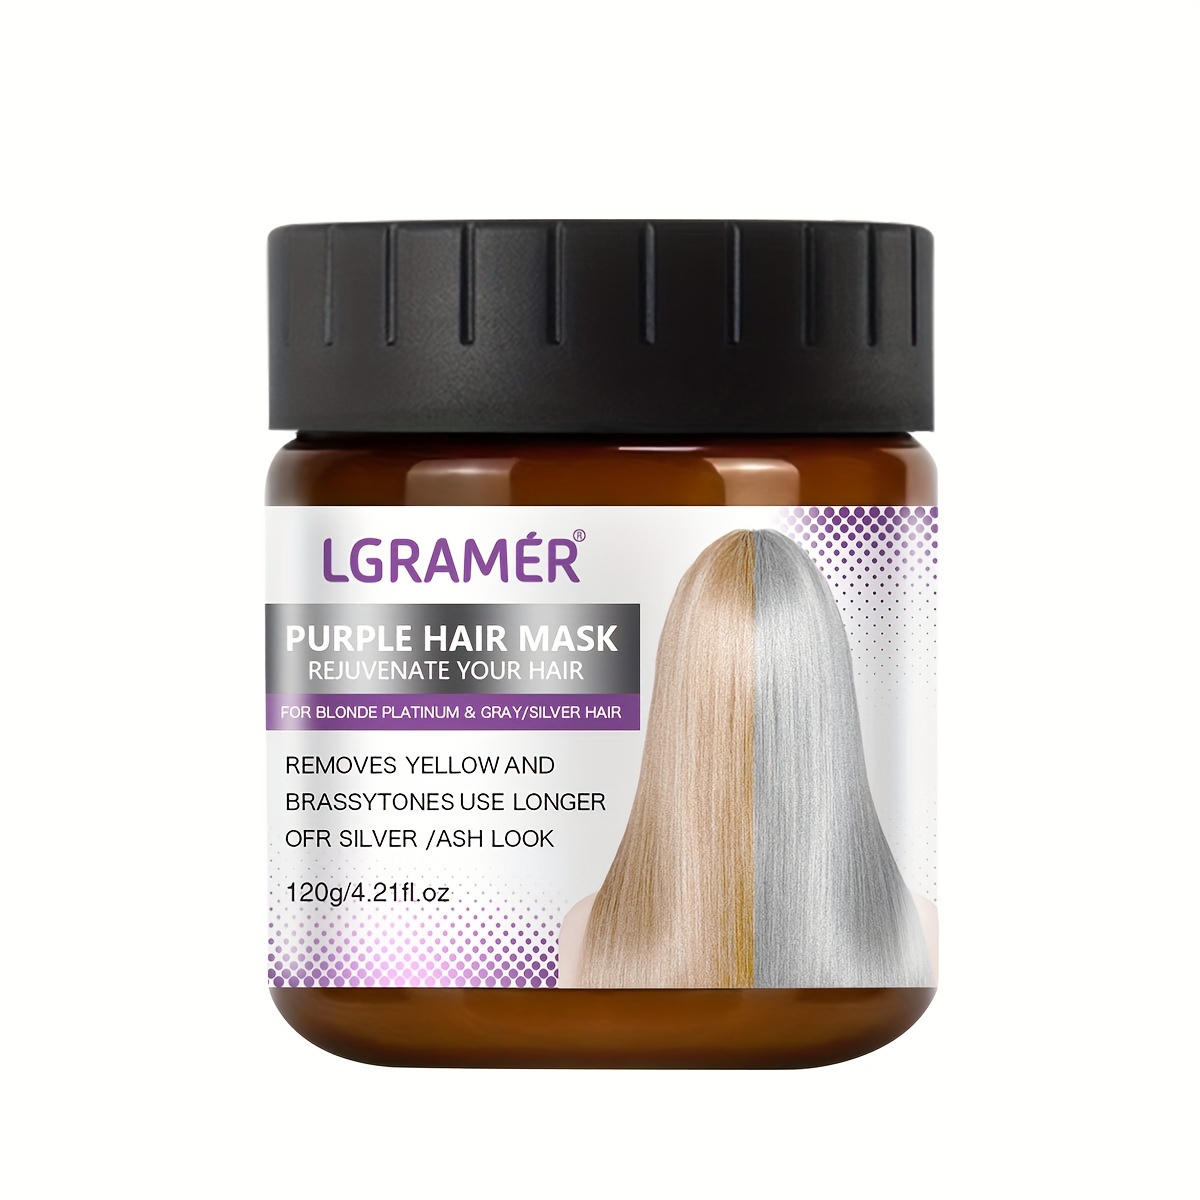 

Lgramer Purple Hair Mask - Deep Moisture For Blonde & Bleached Hair, Removes Copper & Yellow Tones, Soothes & Strengthens, Leaves Hair Smooth & Shiny, Unisex